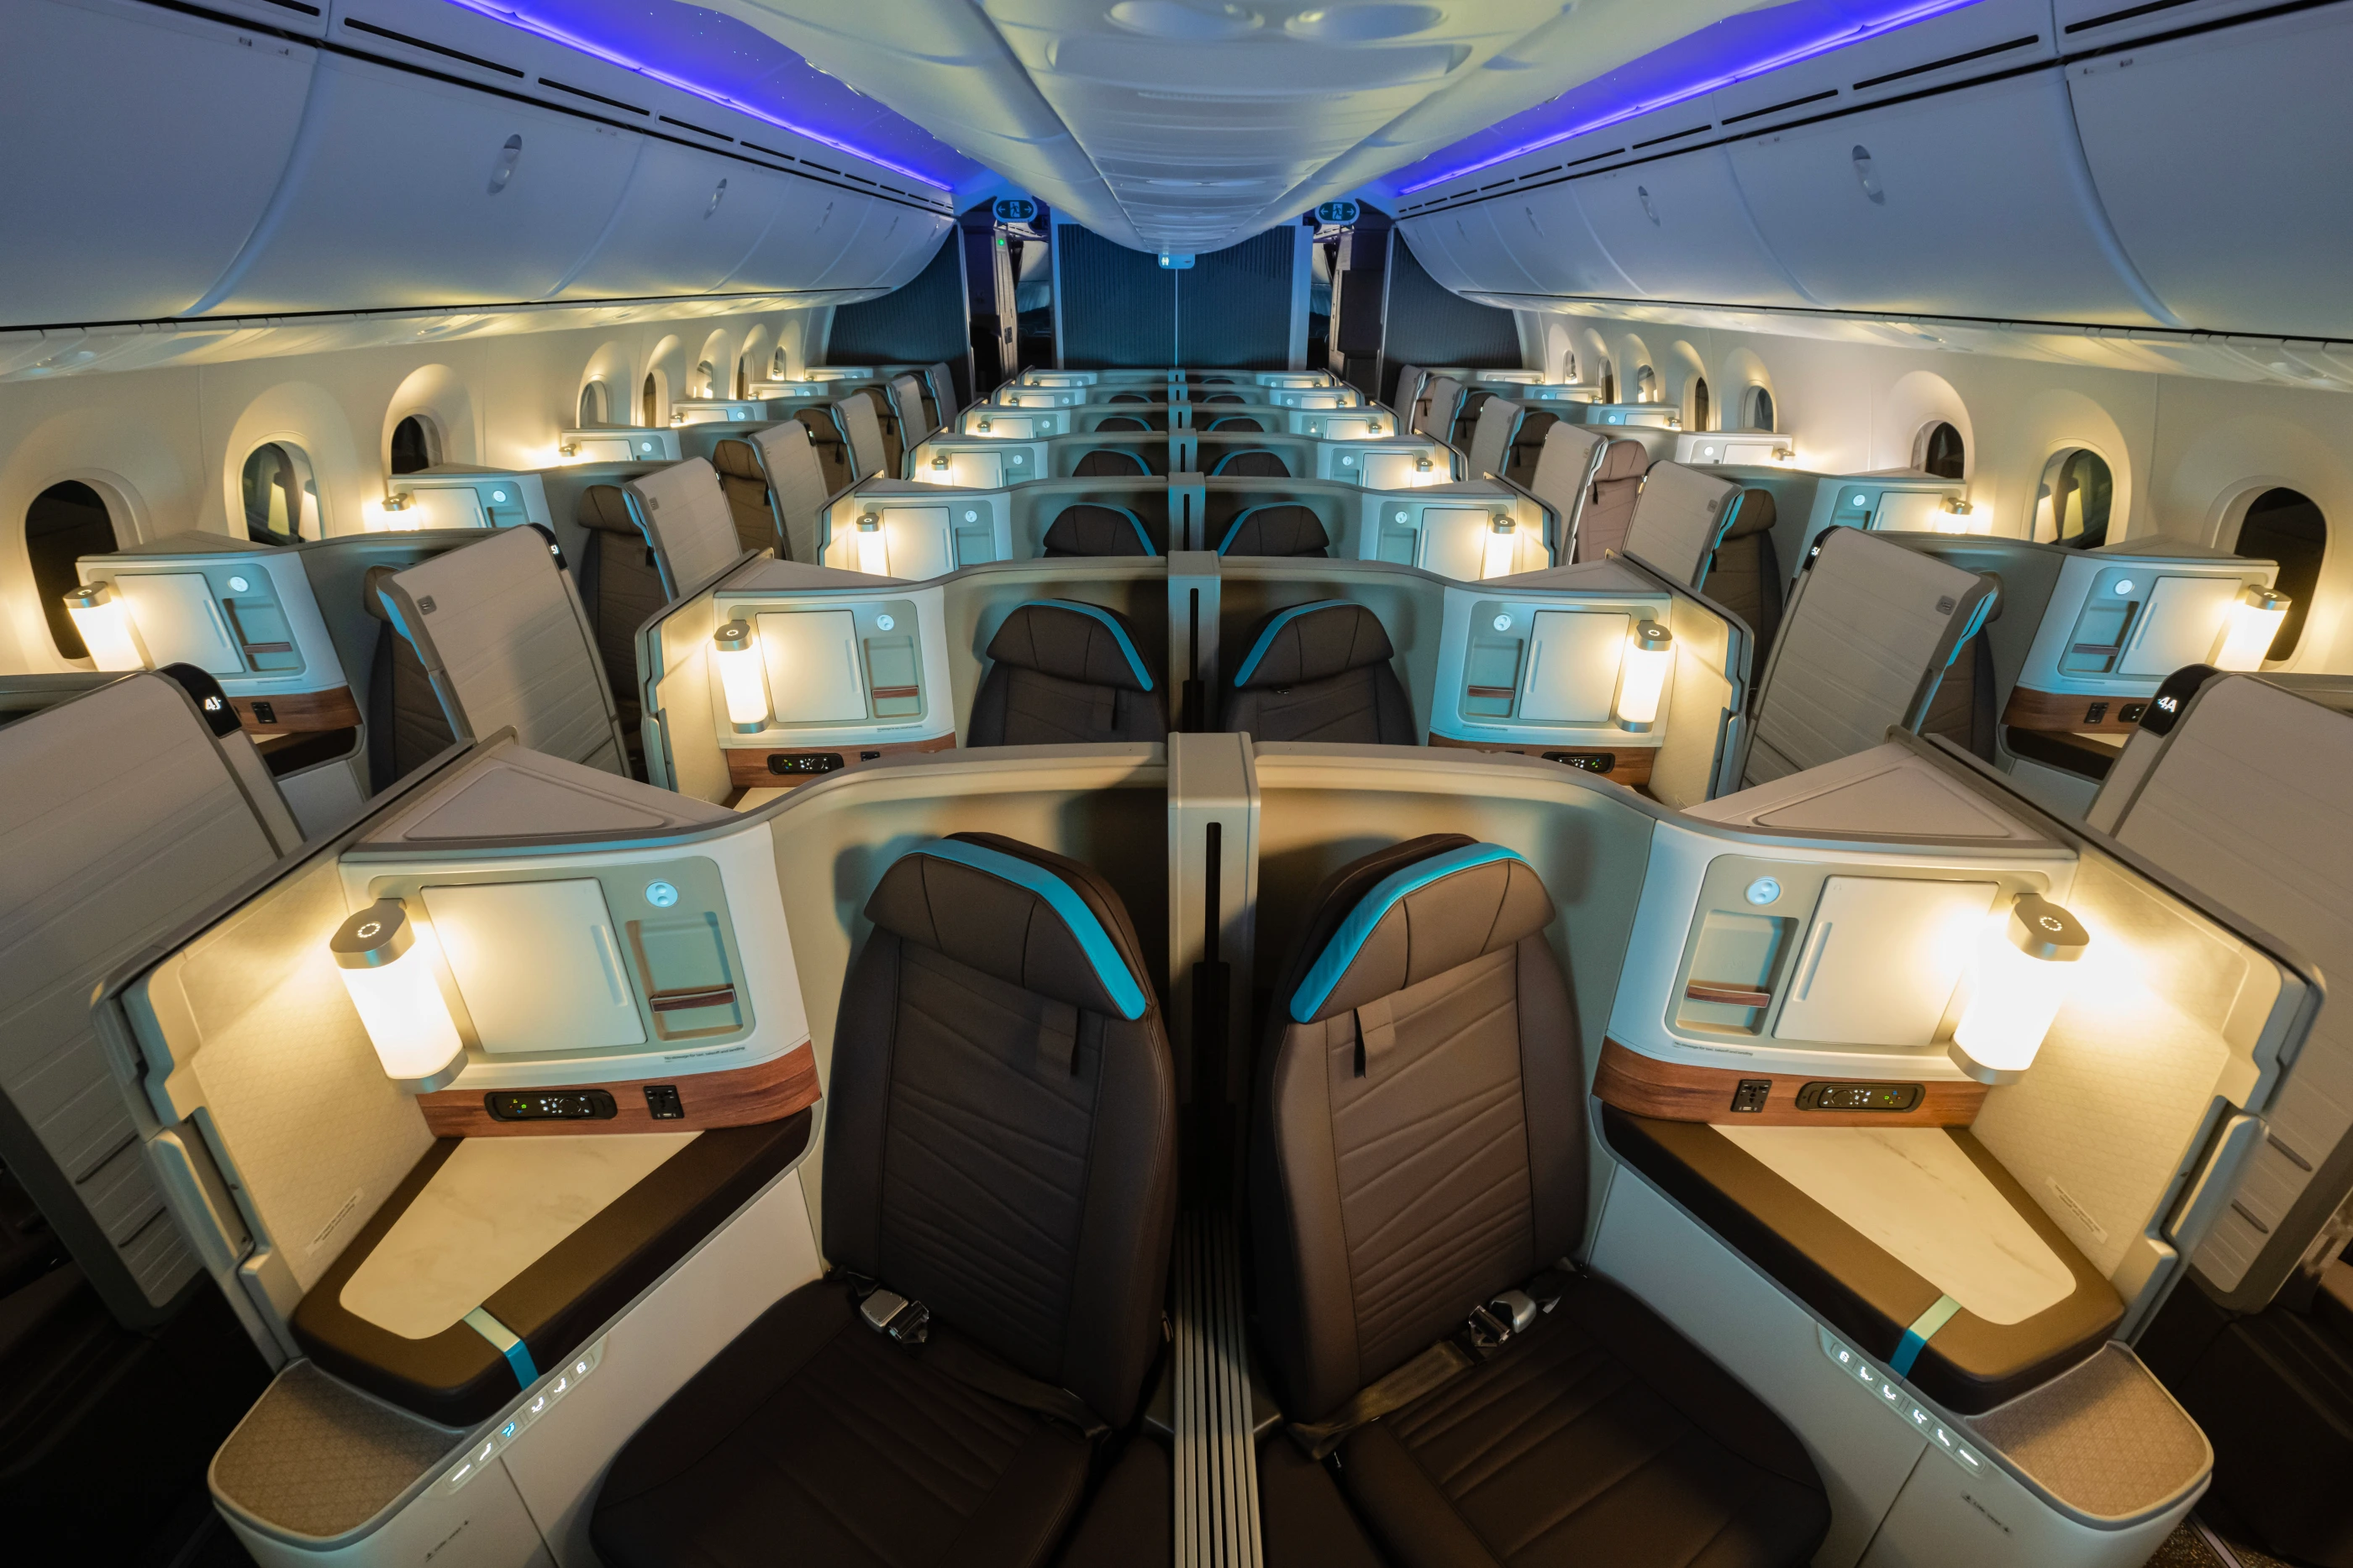 Seven brand-new Business Class seats to fly in 2024